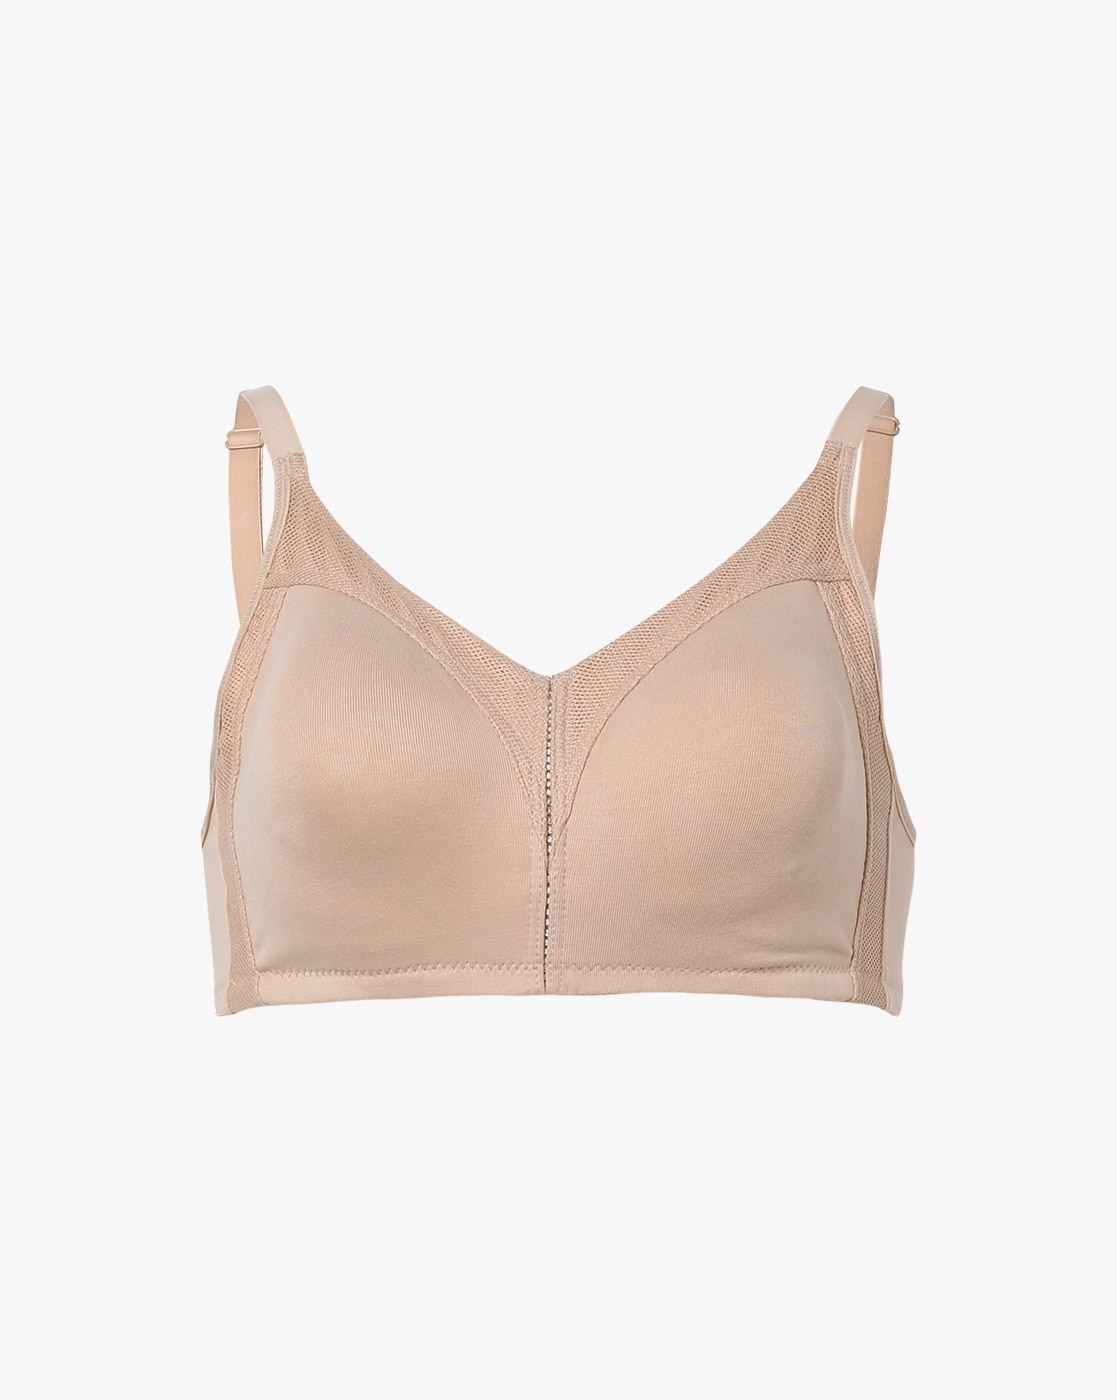 Buy ENAMOR Natural Women's Non Padded Non Wired Full Coverage Every Day Bra